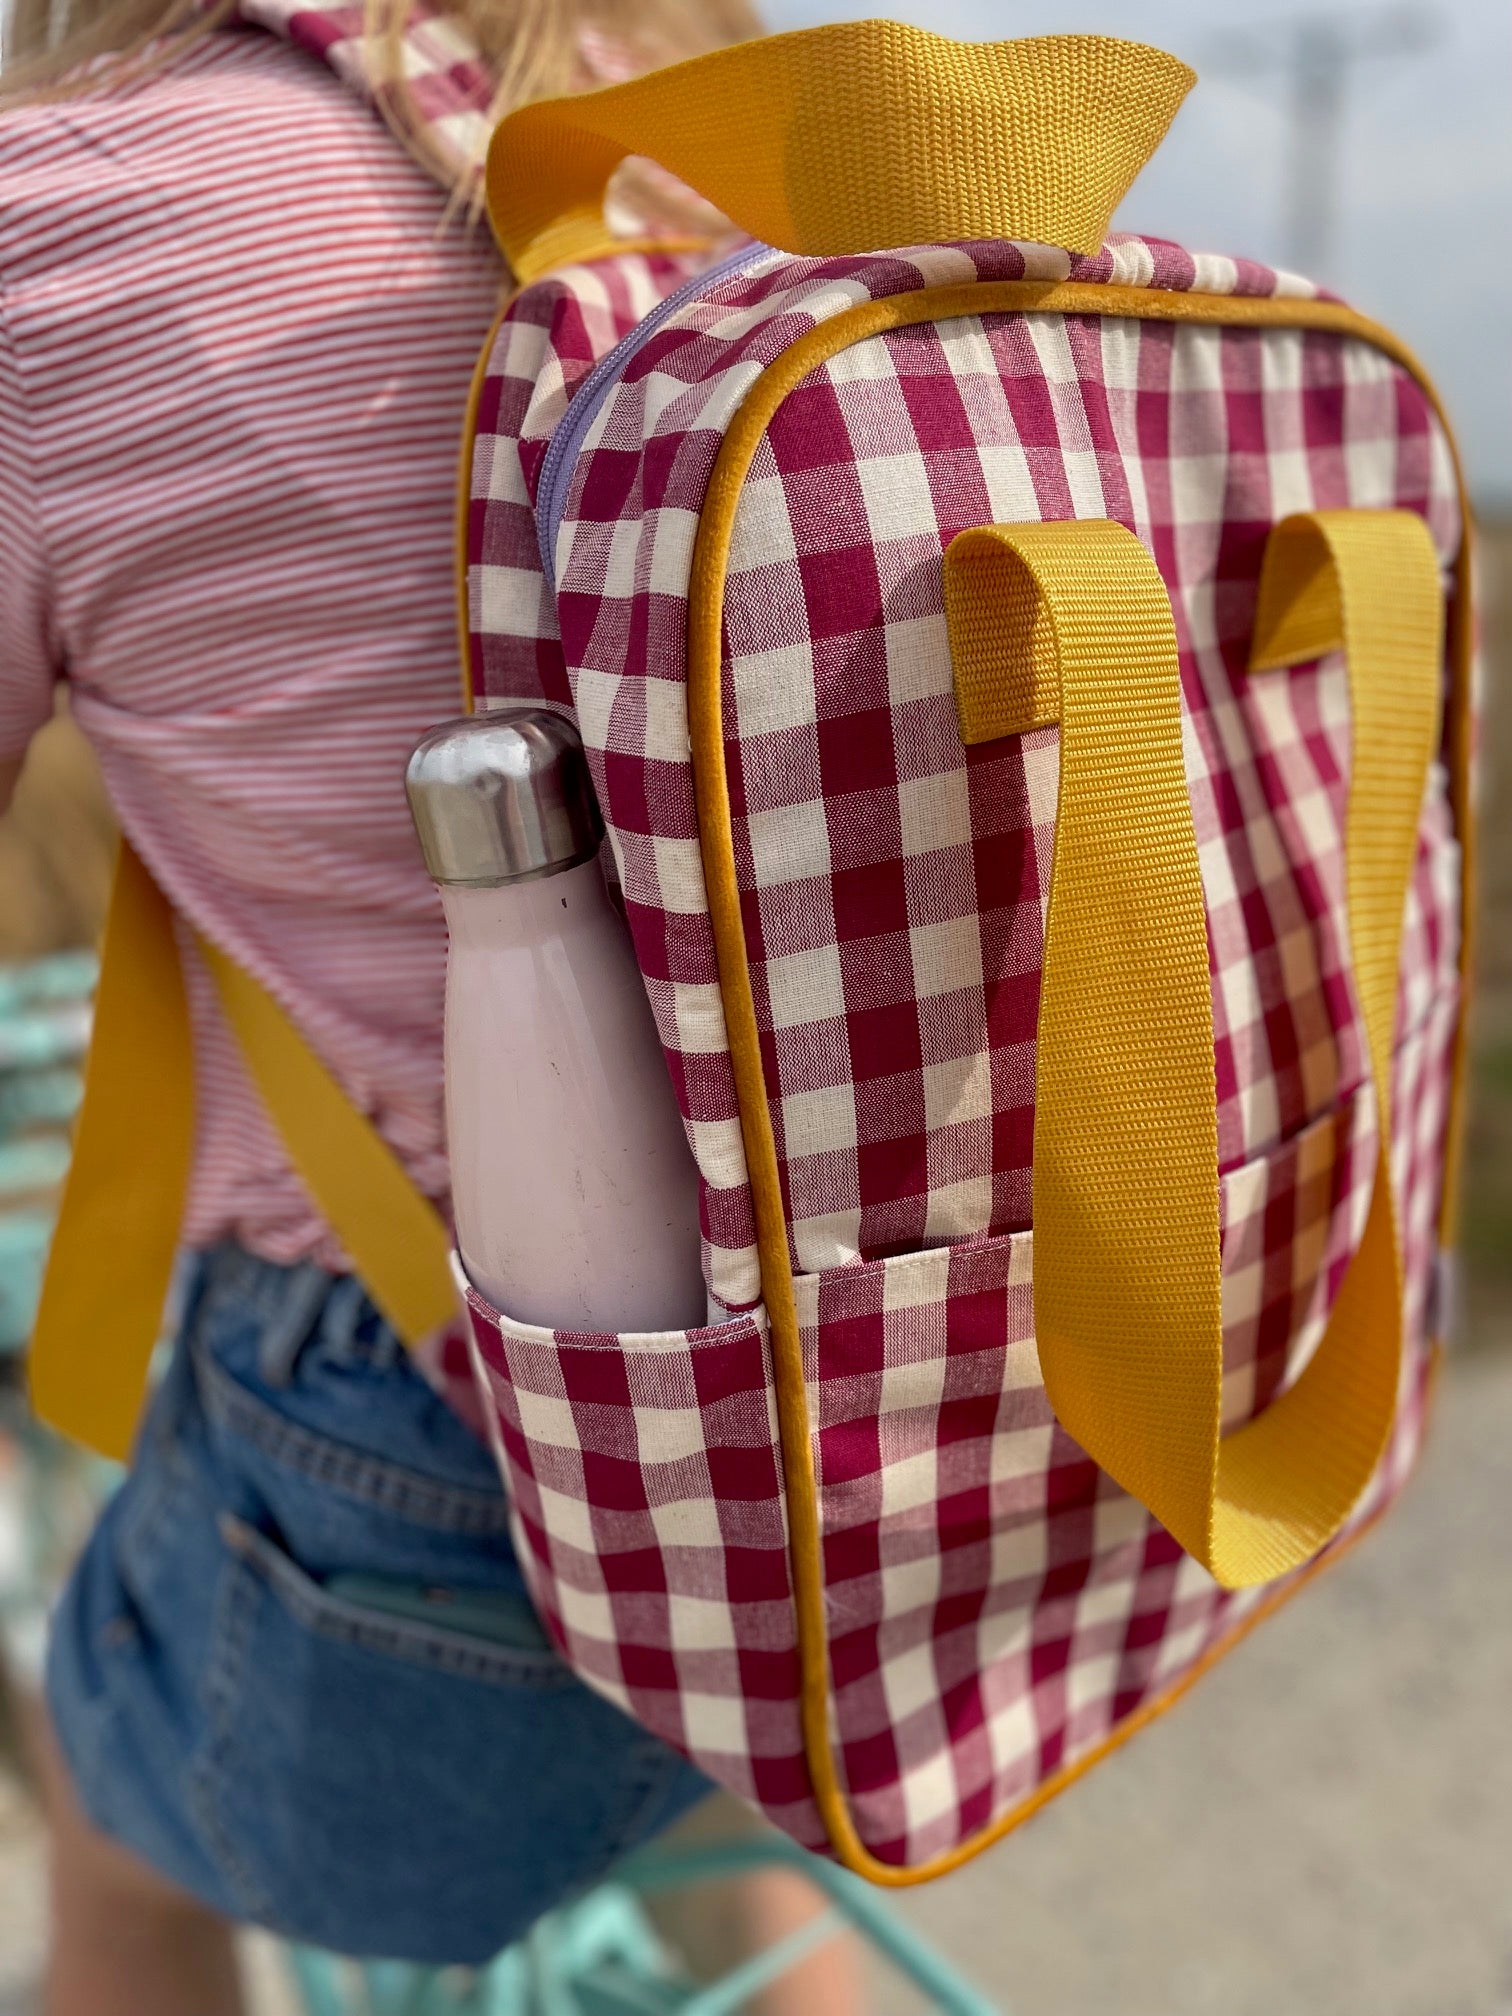 red gingham backpack by bettys home wearing by girl on bike during her trip. red checkered backpack